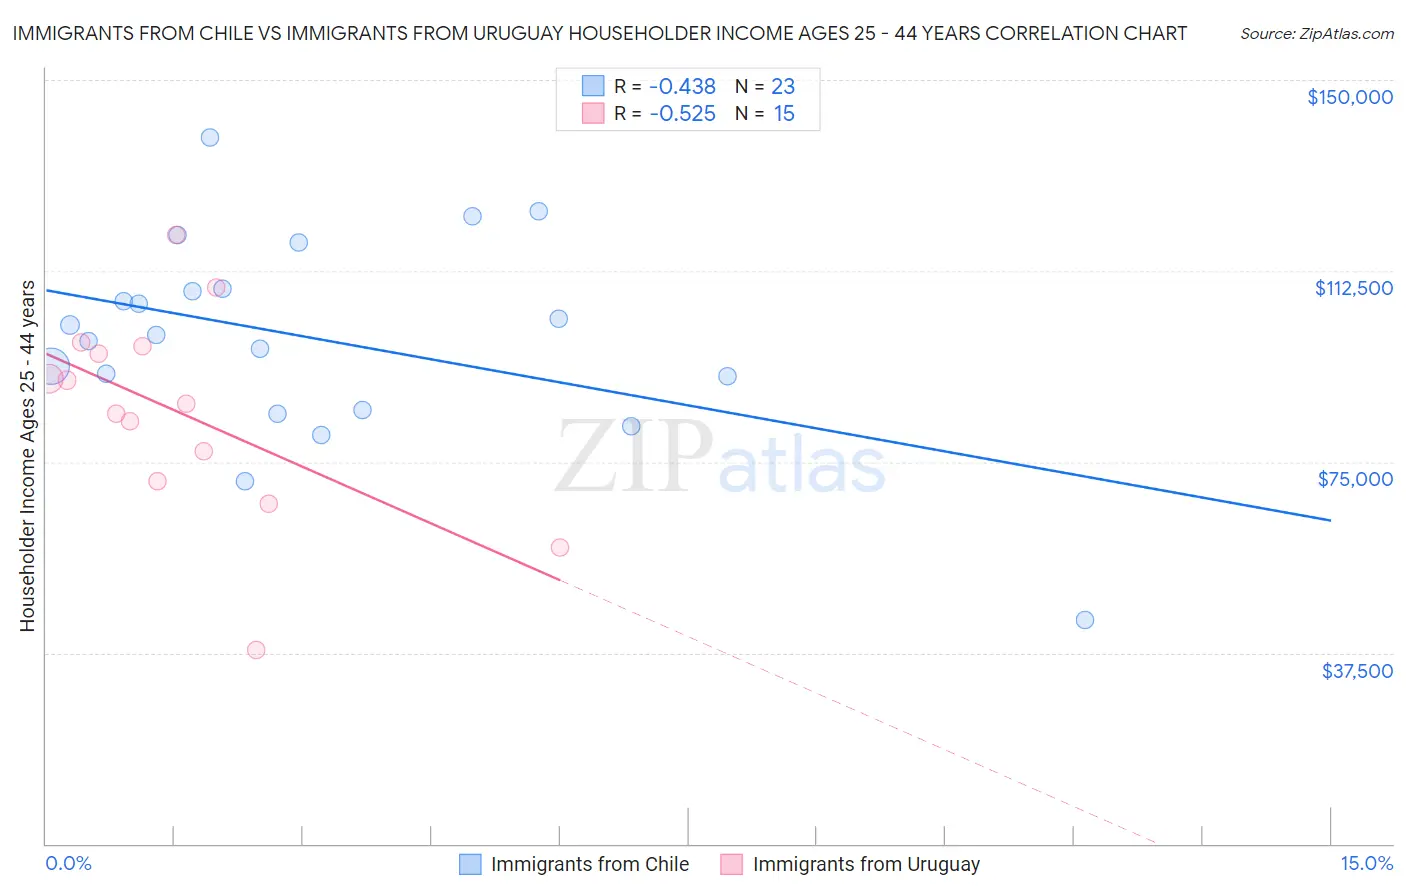 Immigrants from Chile vs Immigrants from Uruguay Householder Income Ages 25 - 44 years